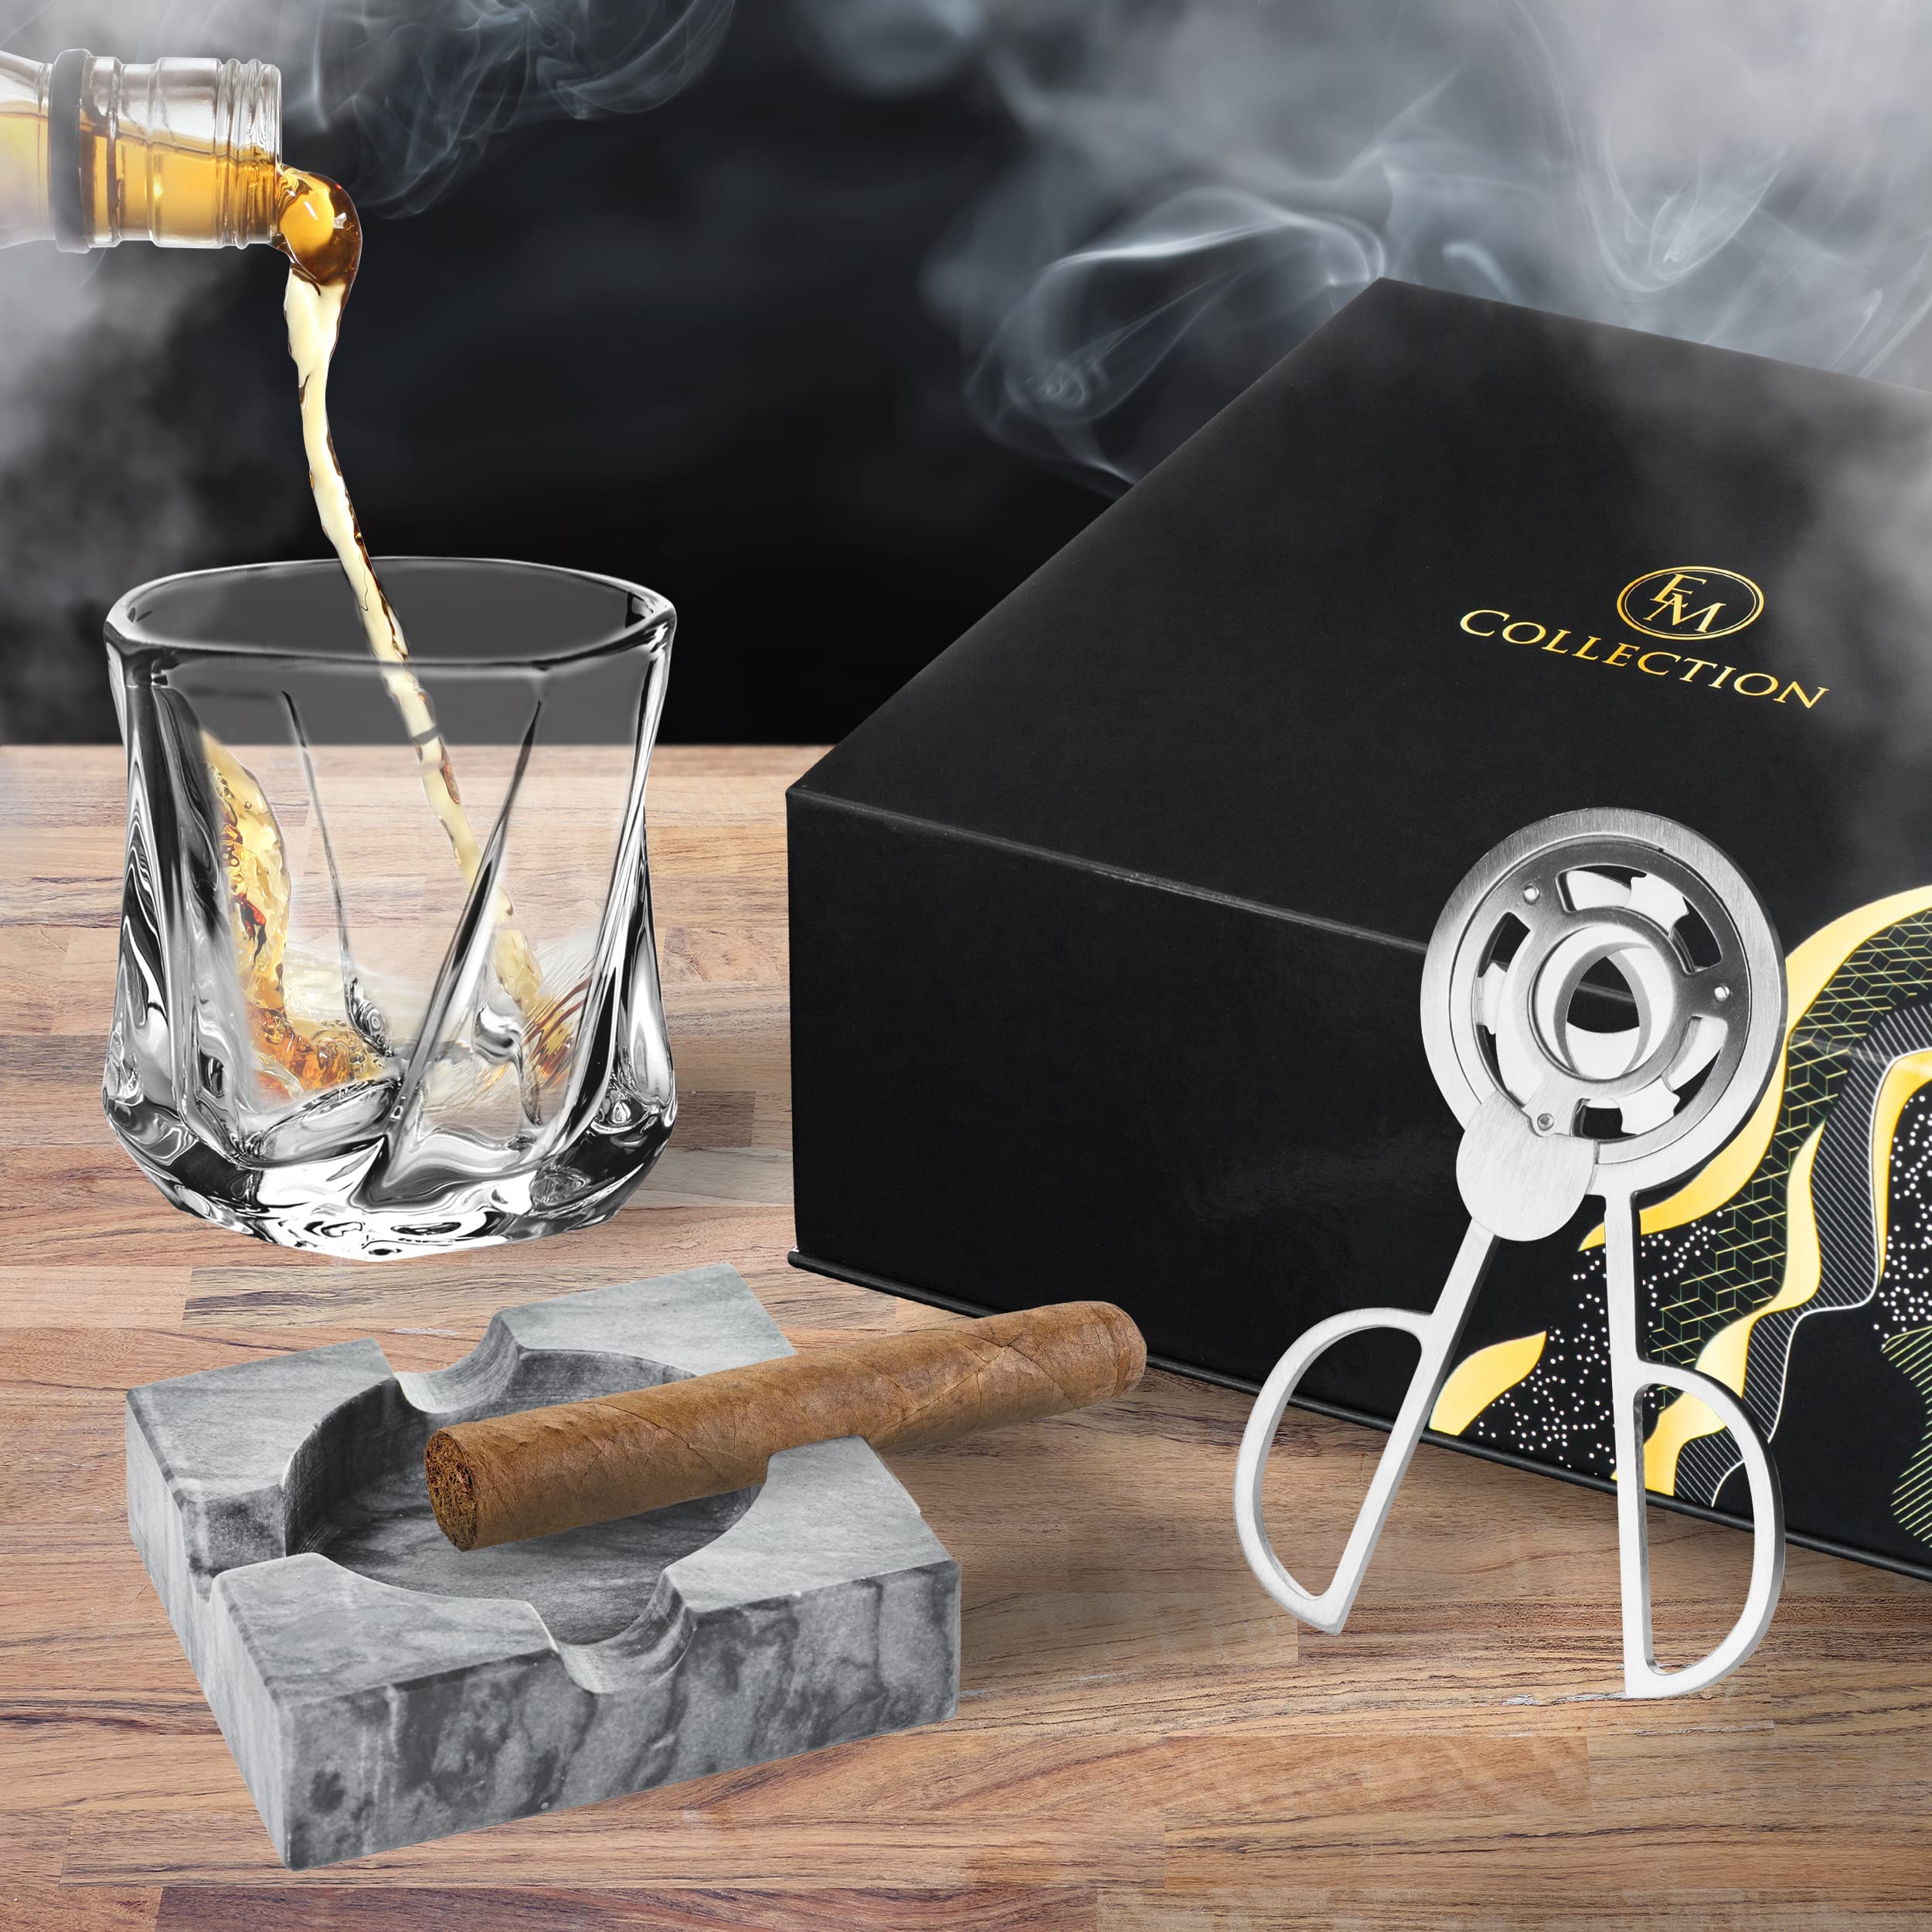 EMCOLLECTION Whiskey Glass Gifts for Men, Bourbon Glasses Old Fashioned | Cigar Cutter Set | Marble Square Cigar Ashtray | Whiskey Glasses Luxury Box | Christmas Gifts for Cigar Lovers